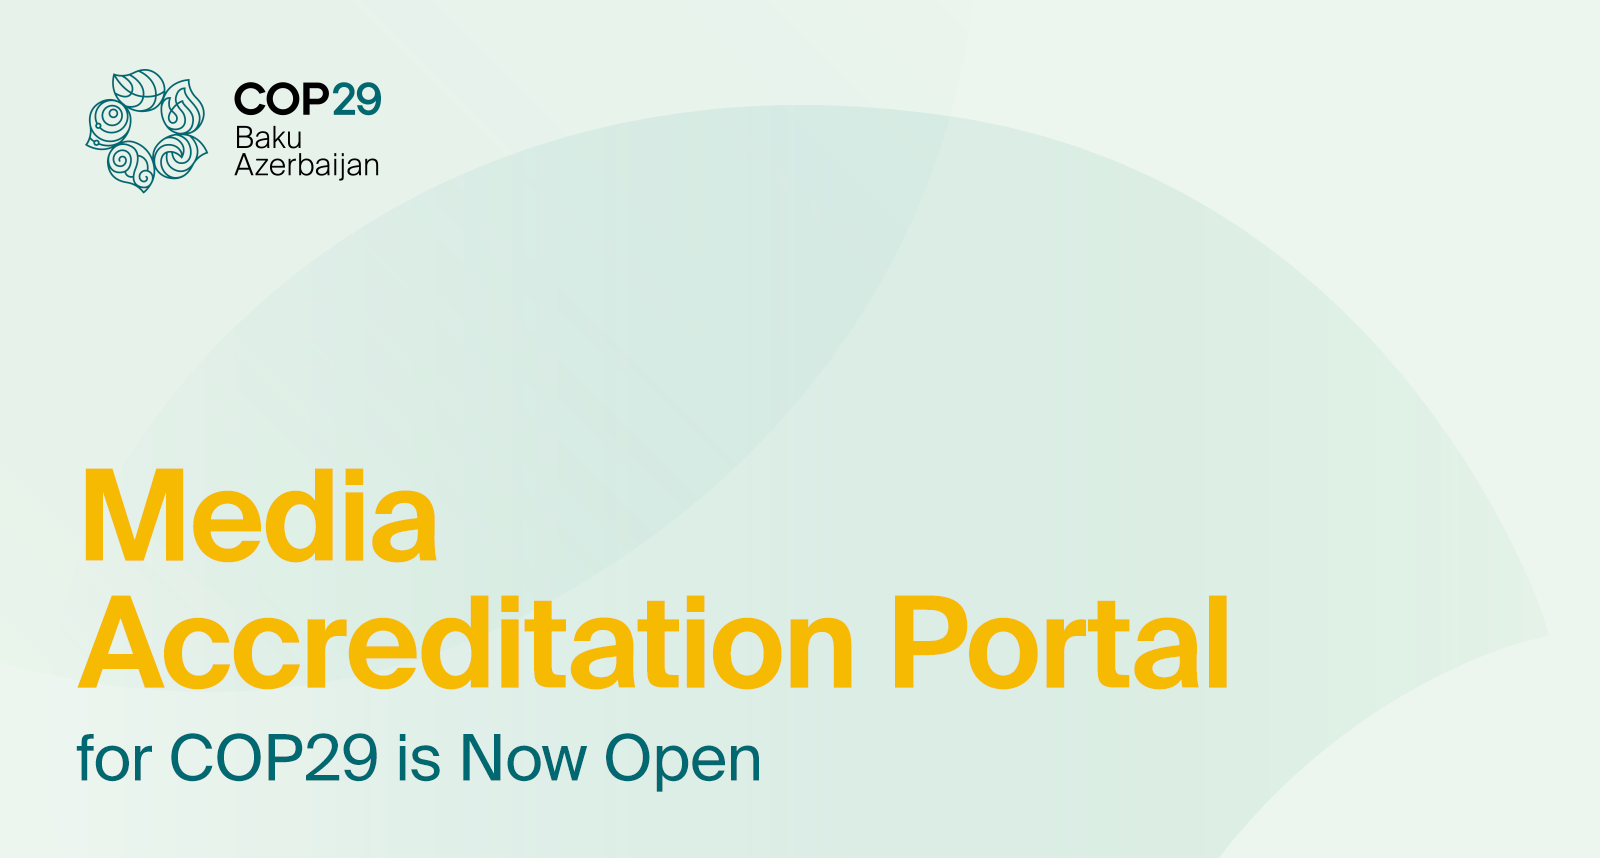 Media accreditation portal for COP29 is now open